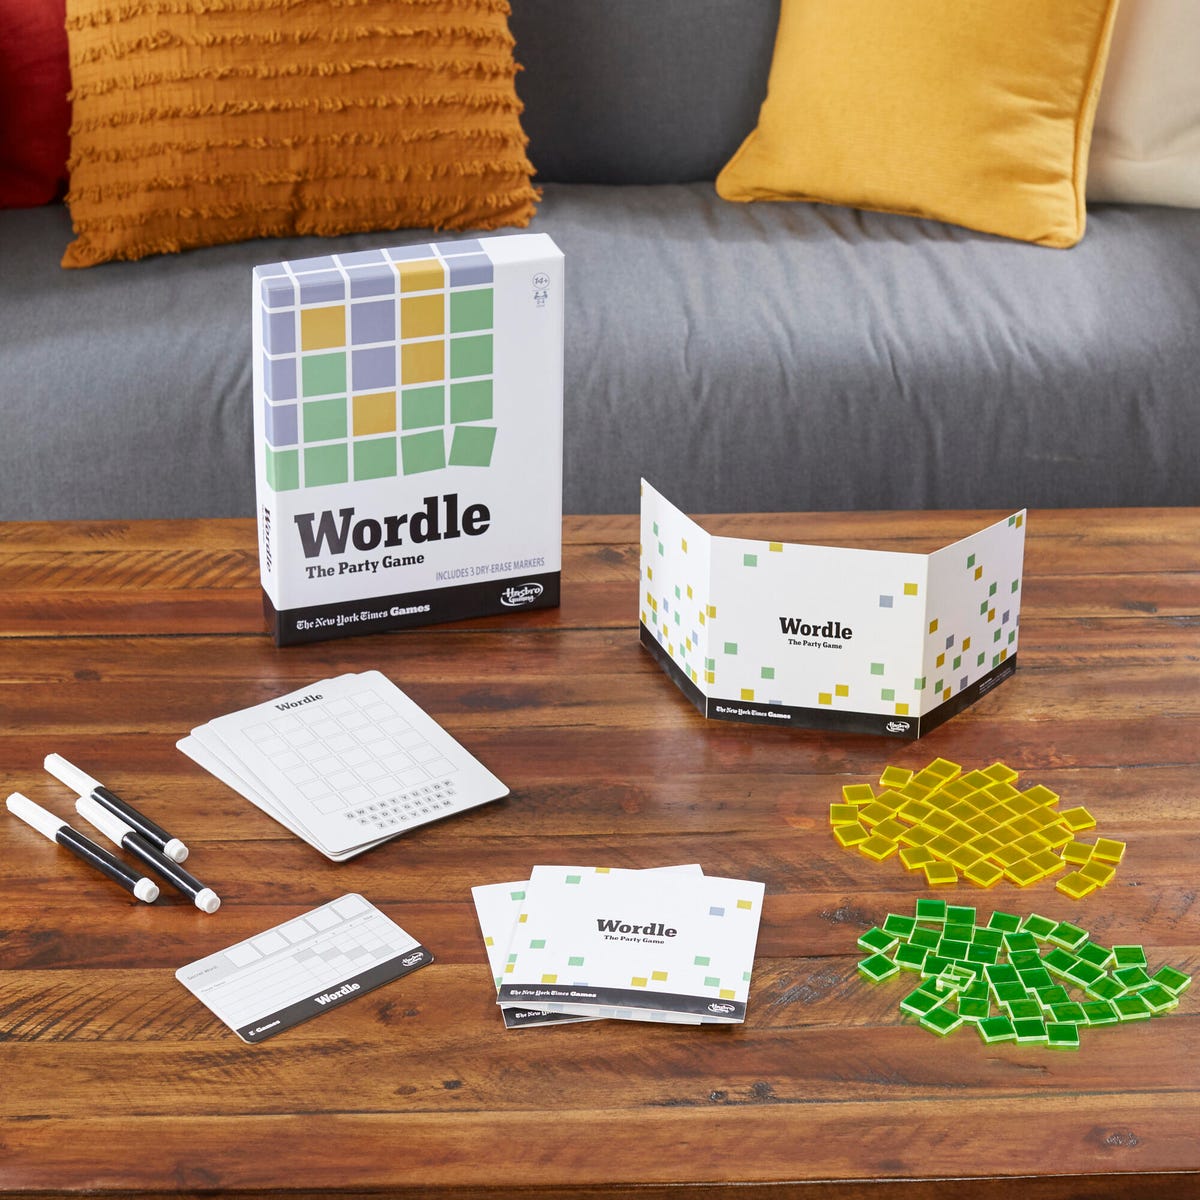 Wordle: The Party Game with yellow and green tiles, game cards and other game material